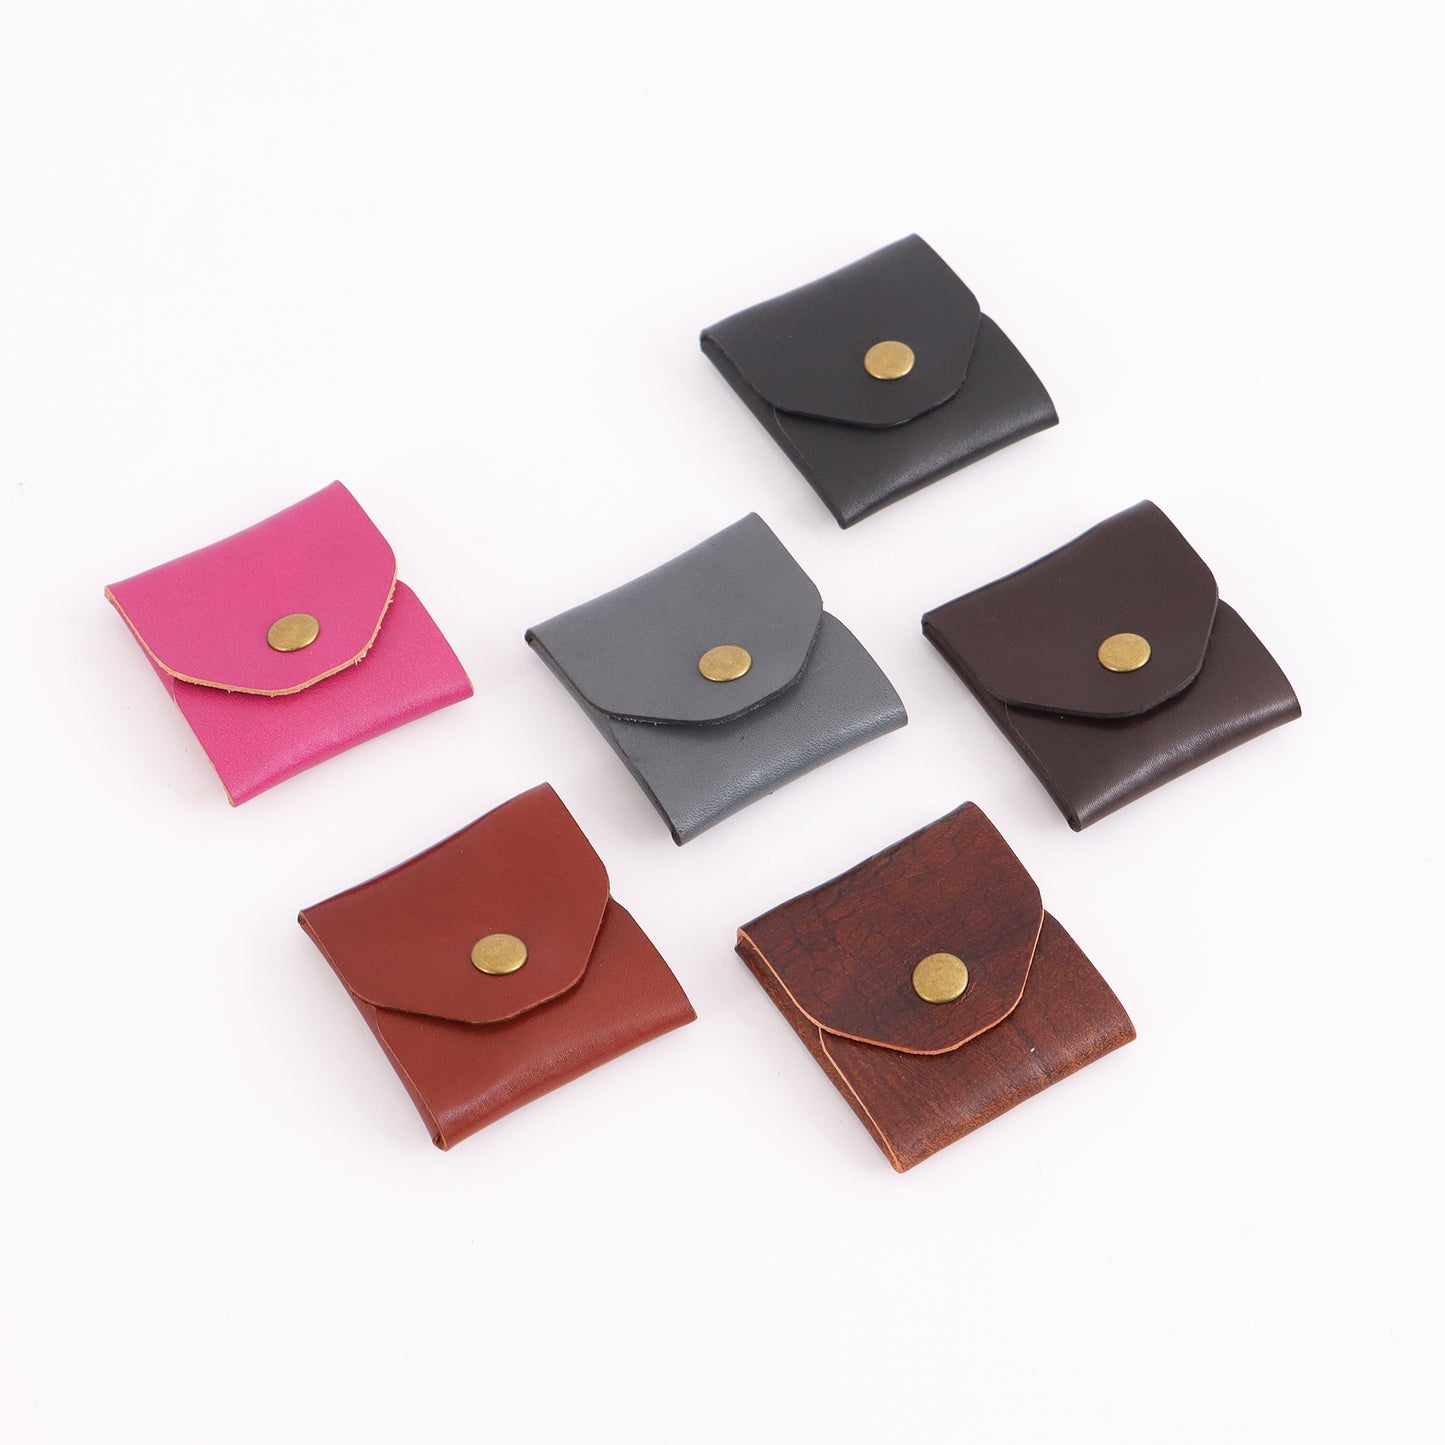 Handmade Genuine Leather Coin Holder and Pouch Leather Coin Case